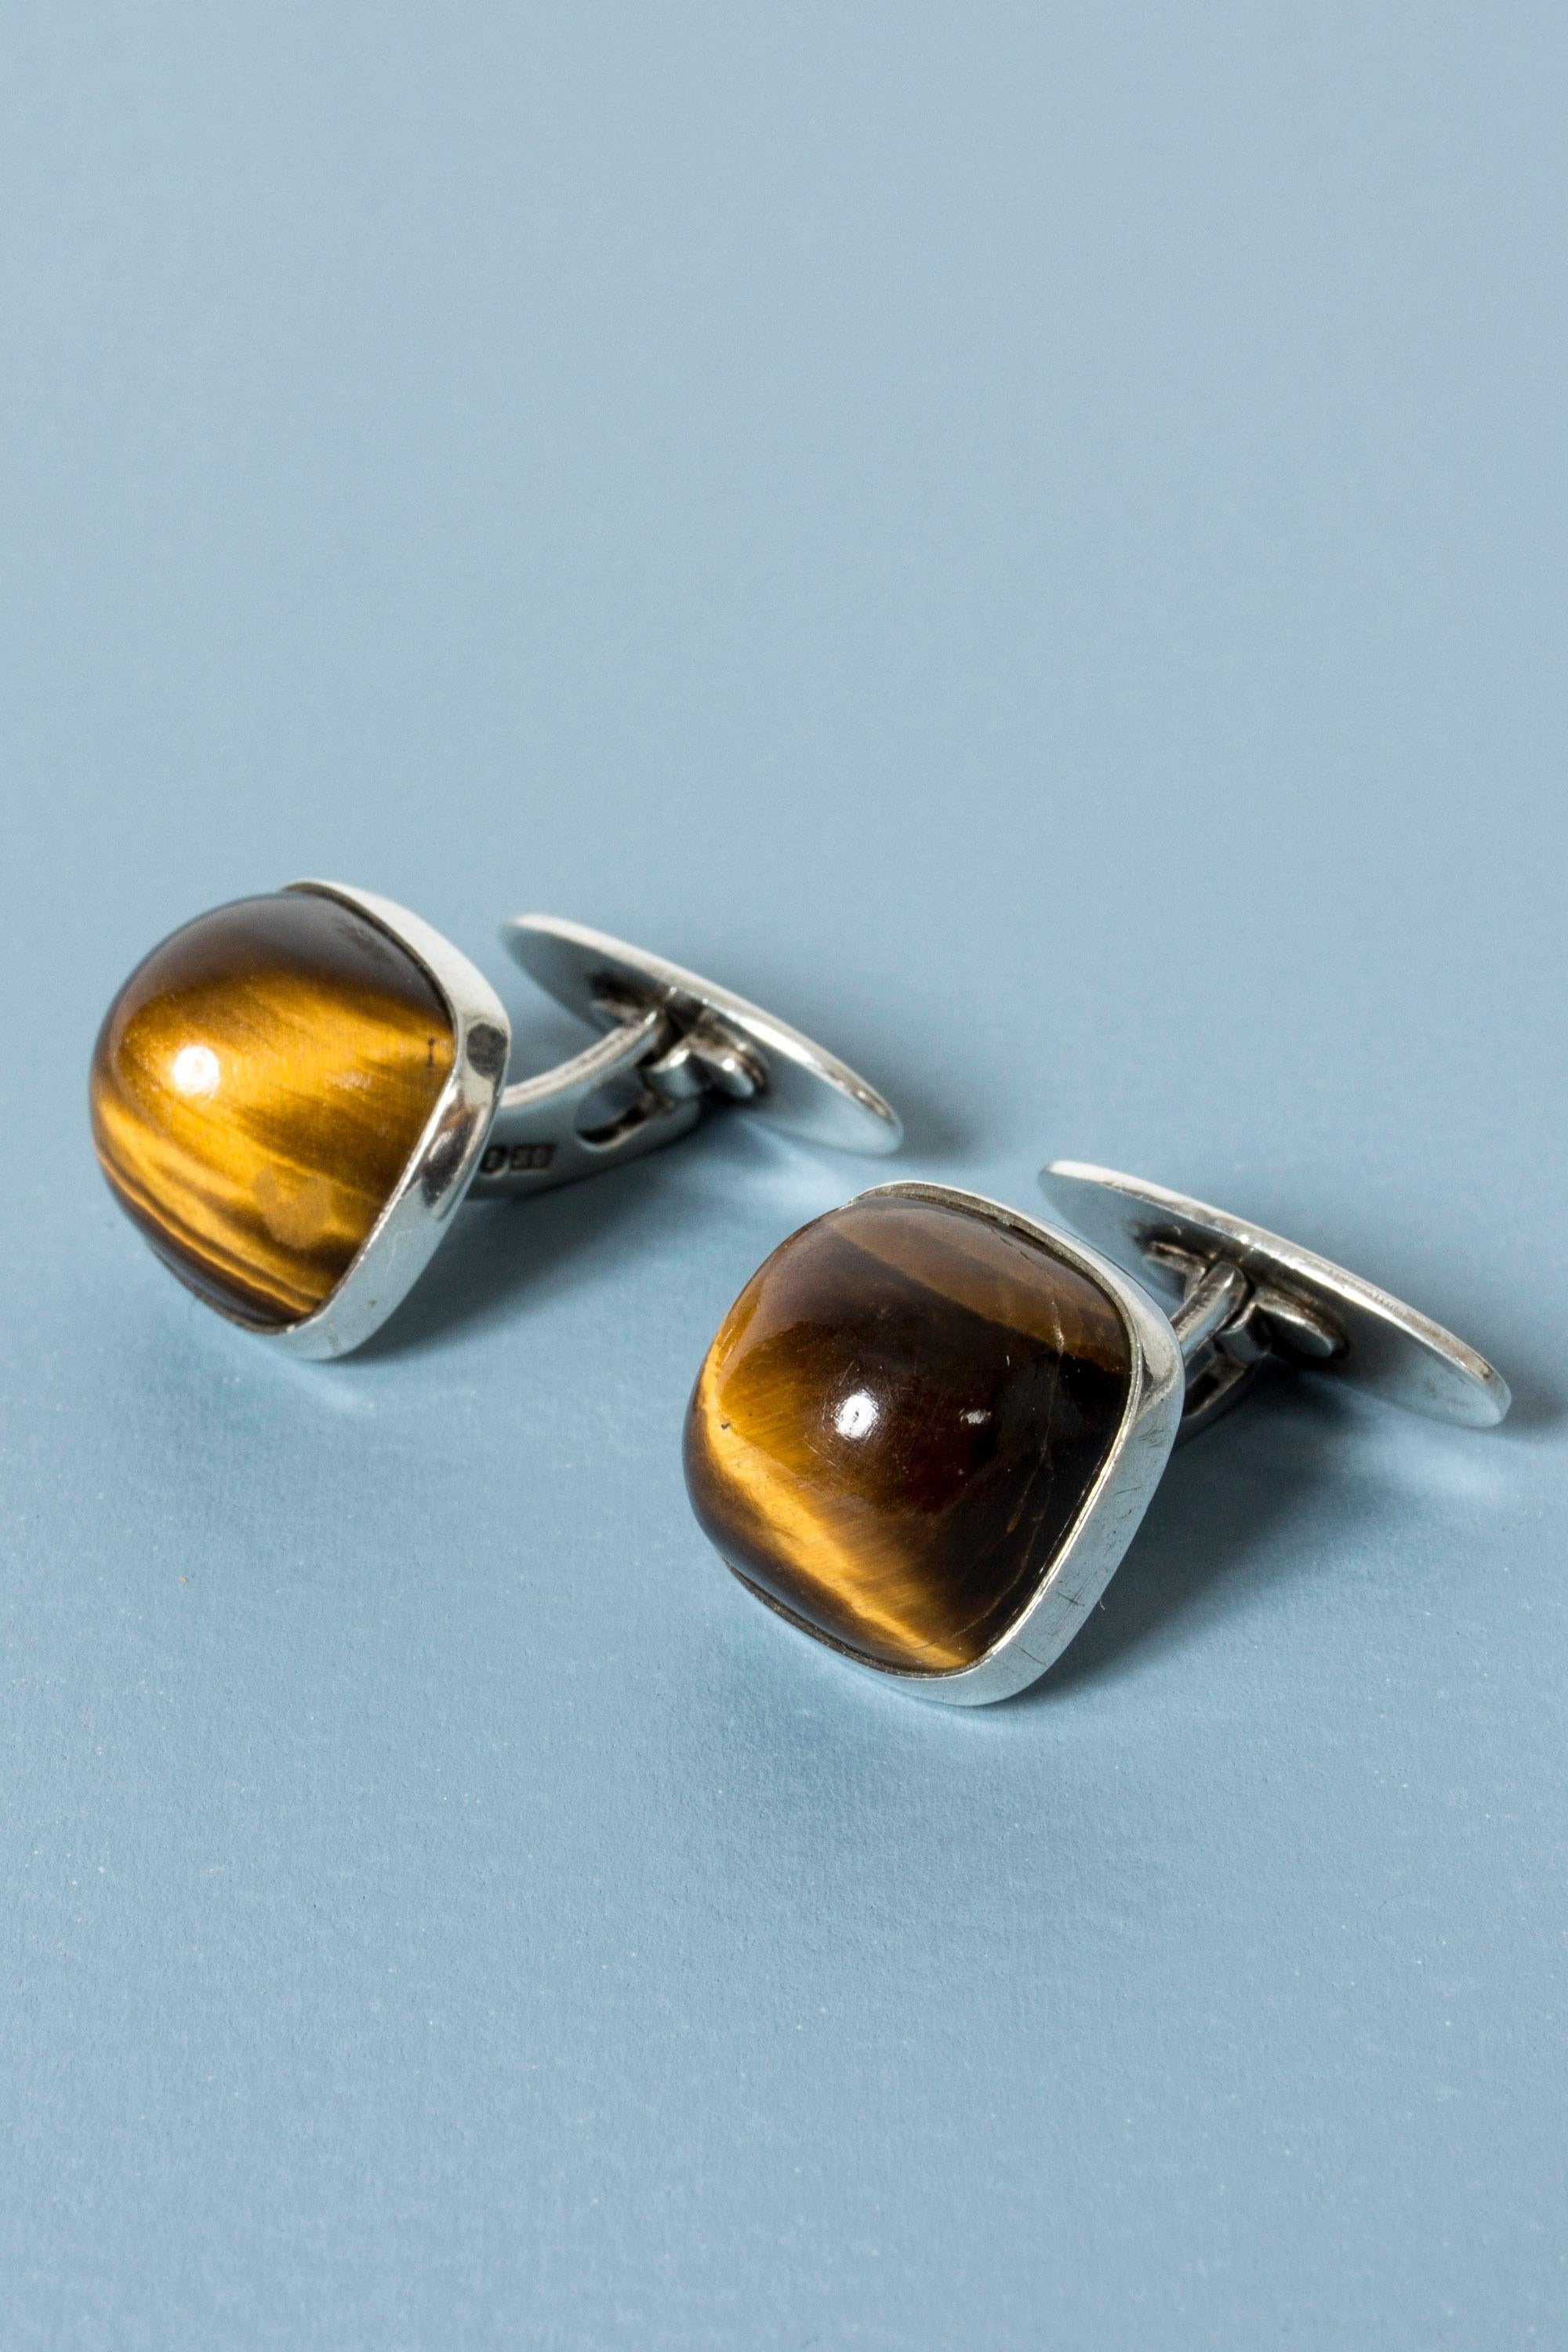 Pair of cool silver and tigereye cufflinks from Kaplans, with large, rounded, protruding stones. Warm, toffee colored stones.